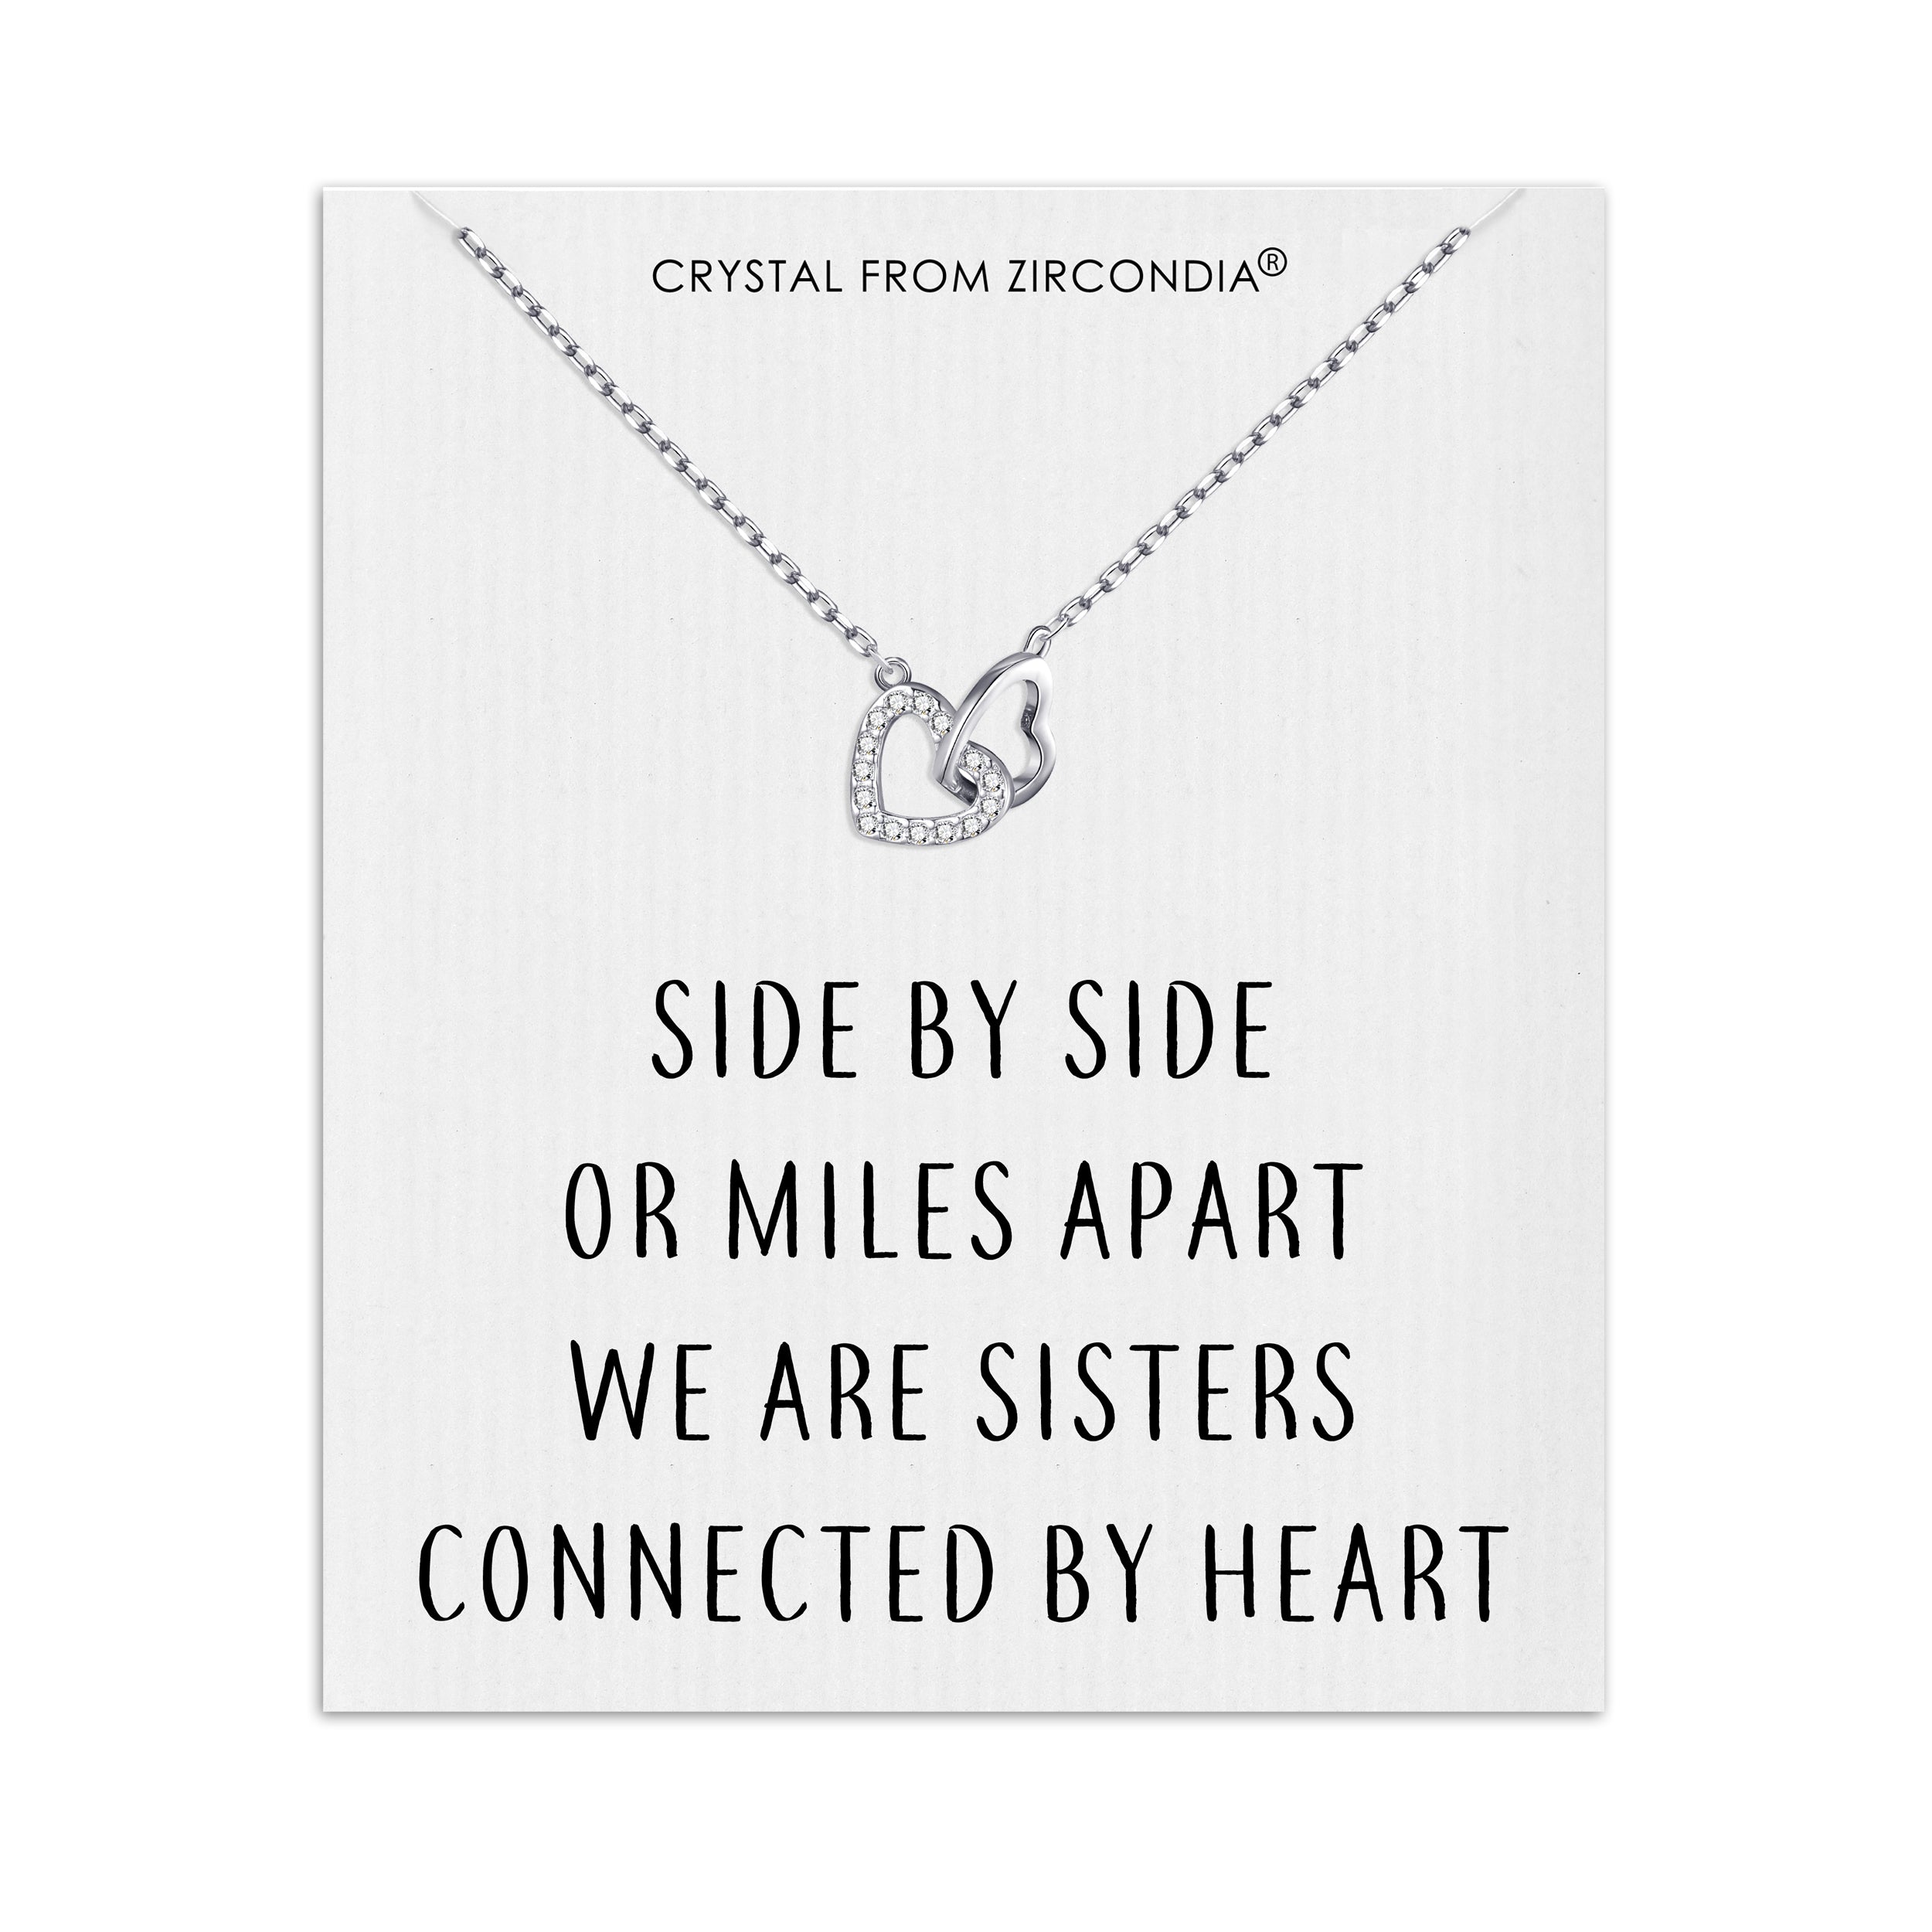 Sister Heart Link Necklace with Quote Card Created with Zircondia® Crystals by Philip Jones Jewellery